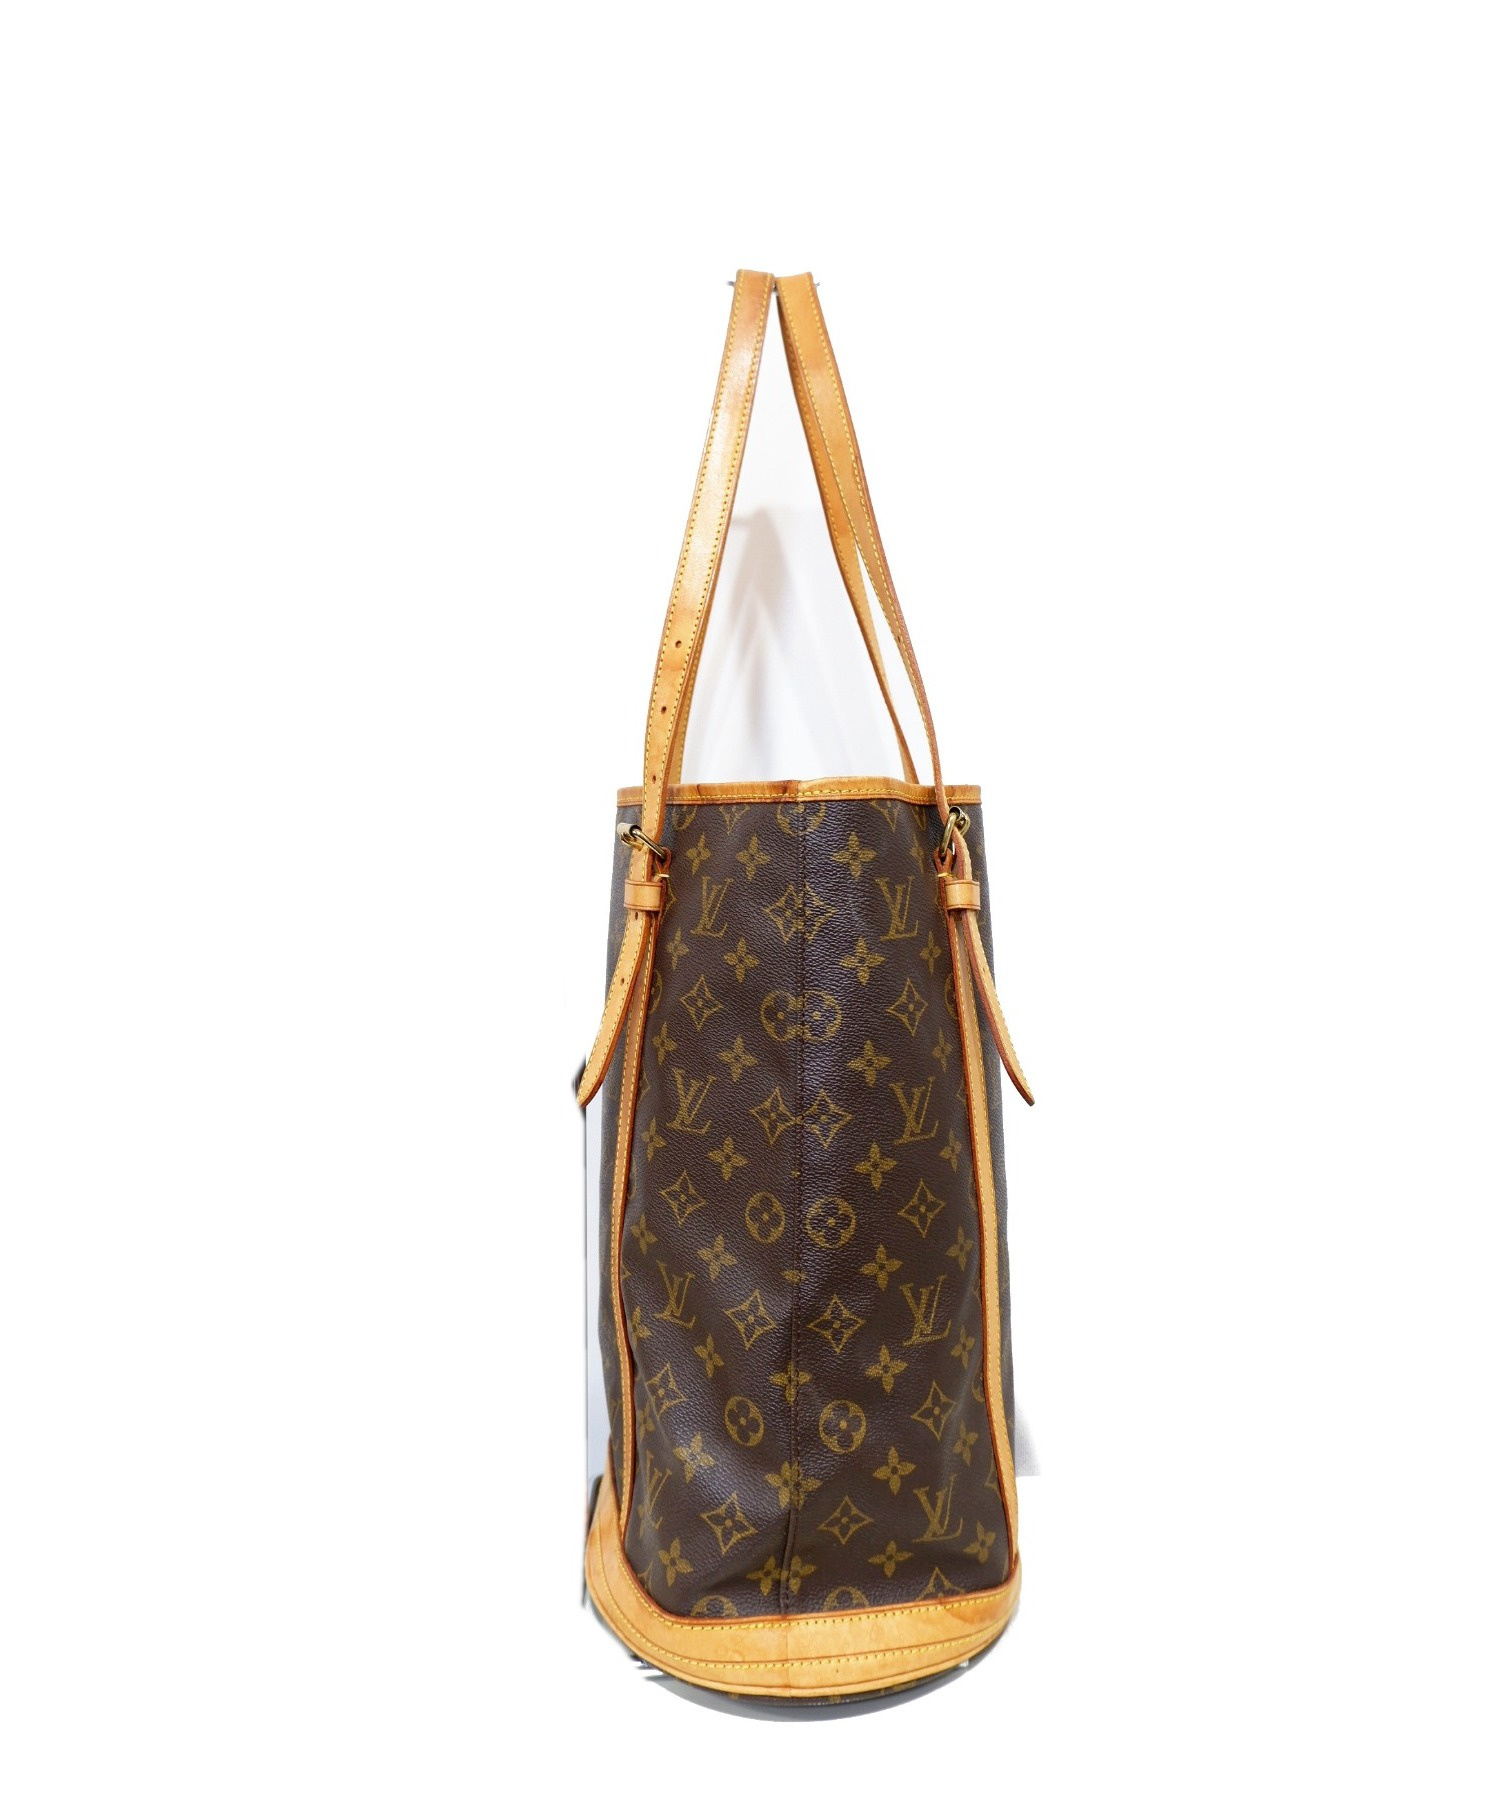 LOUIS VUITTON (ルイヴィトン) バケットGM/トートバッグ ブラウン 